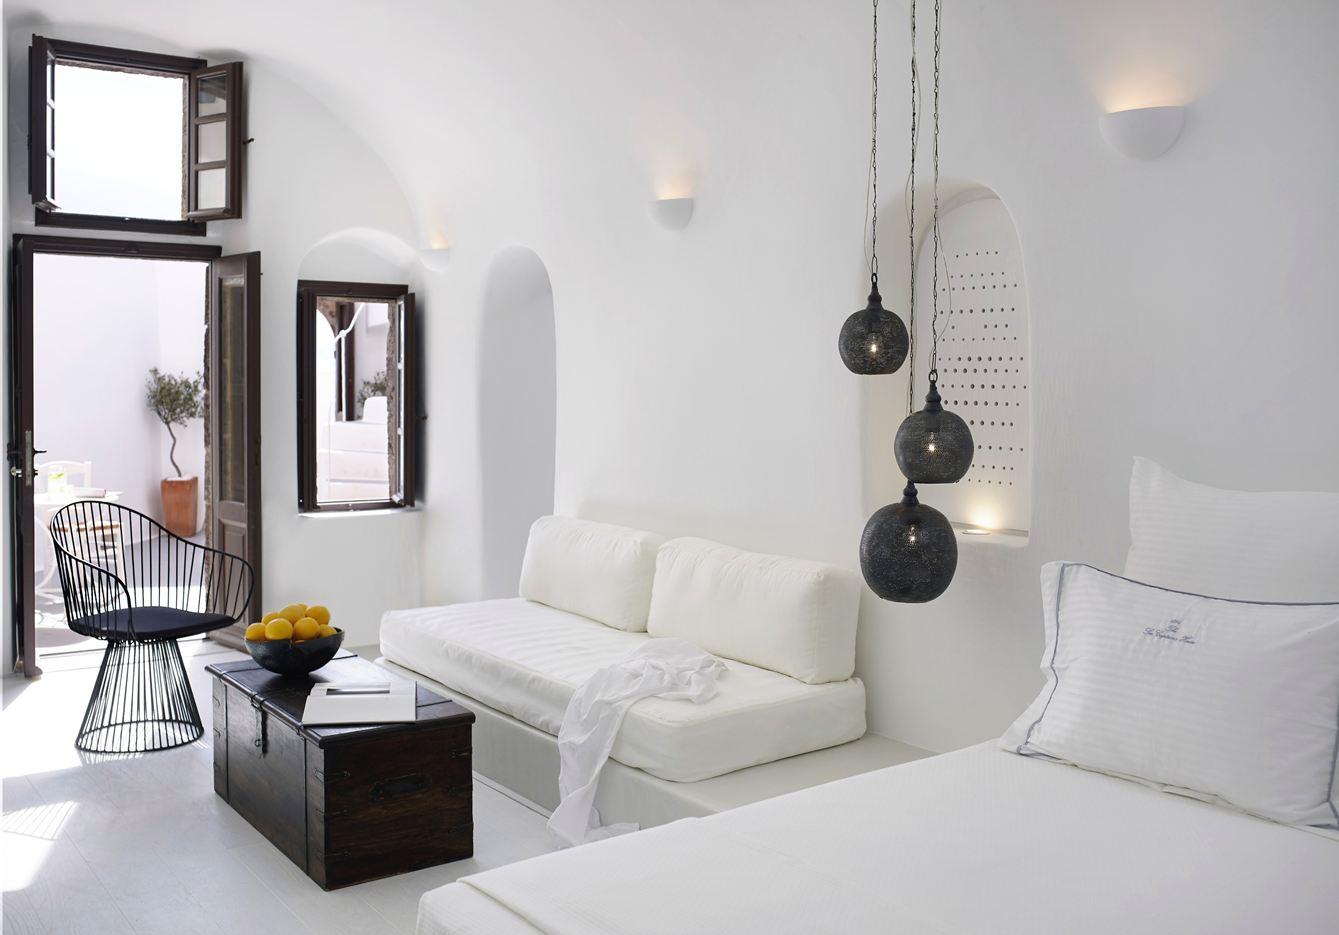 Cave Suite in Oia, Greece by PATSIOS